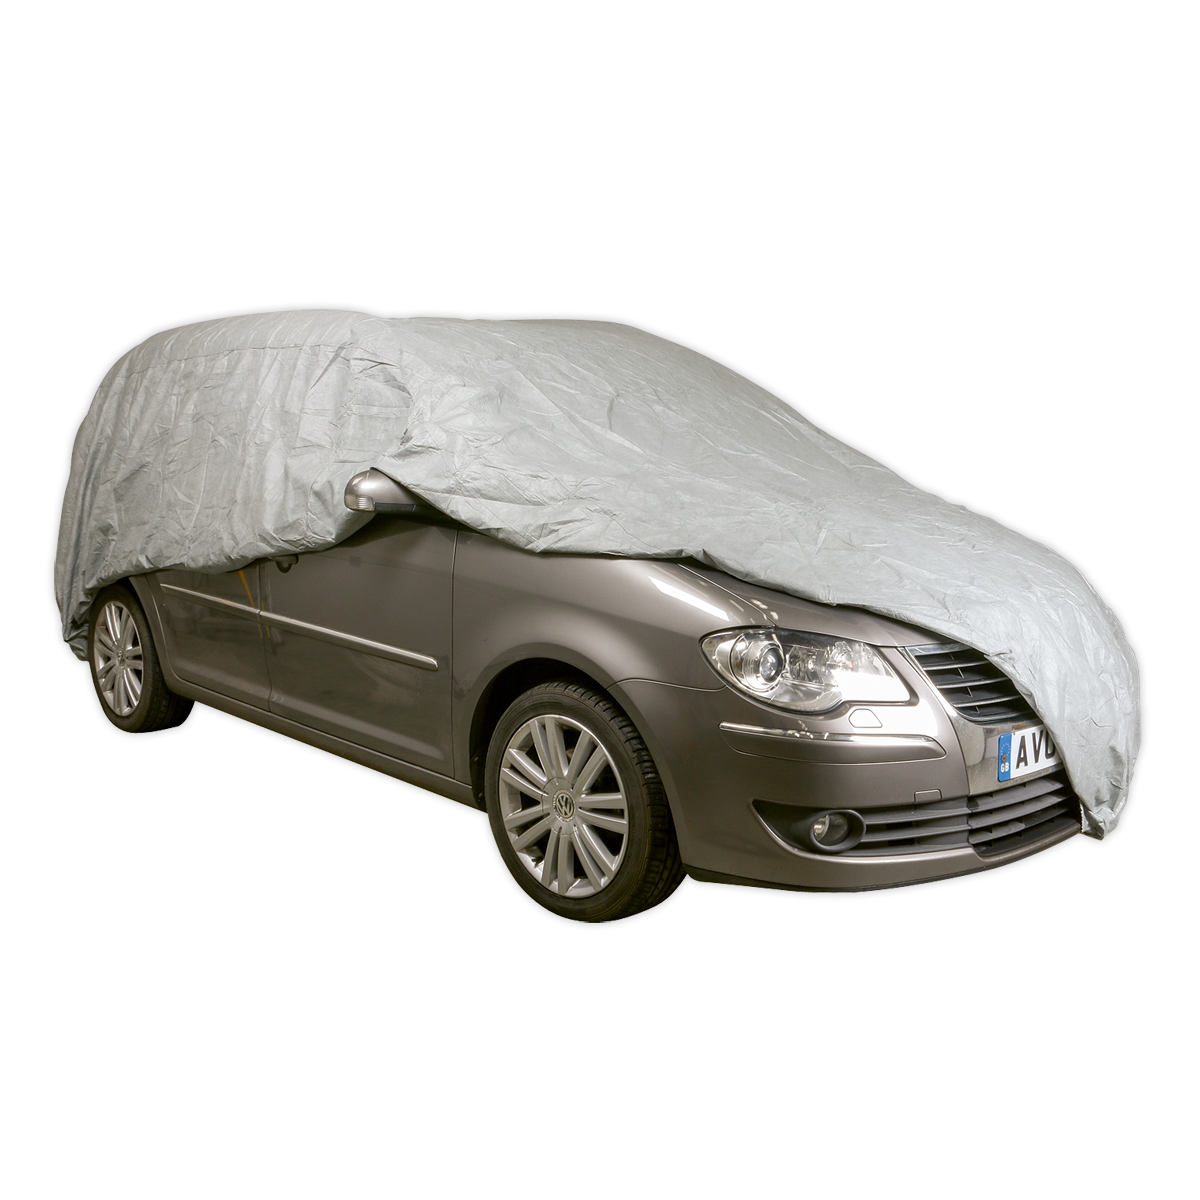 All Seasons Car Cover 3-Layer - XX-Large - SCCXXL - Farming Parts